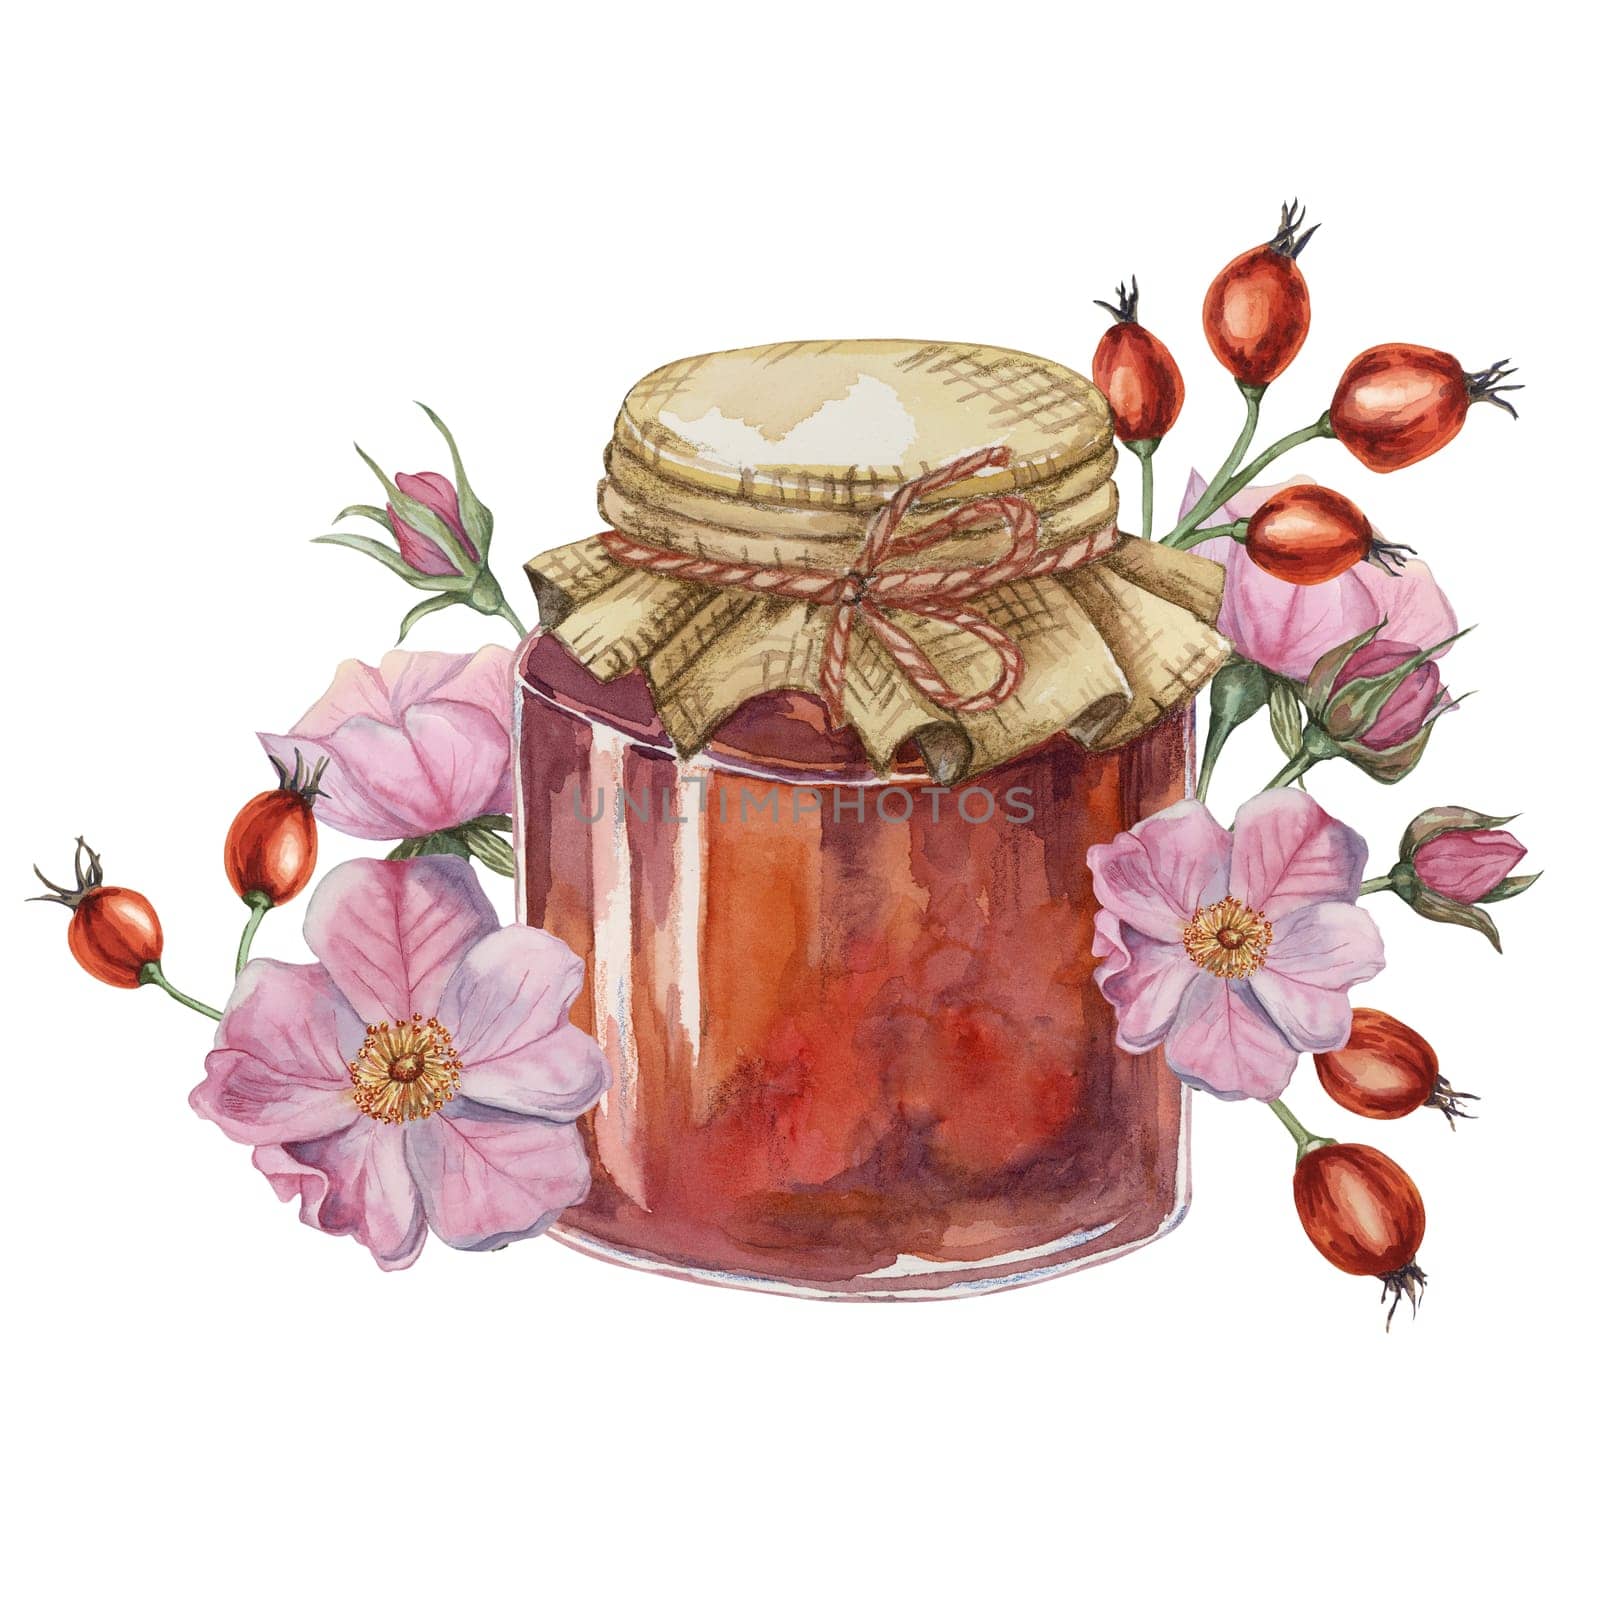 Rose hip jam in glass jar with canvas fabric lid and twine rope bow. German fruit preserve watercolor illustration for printing, packaging, cards by Fofito